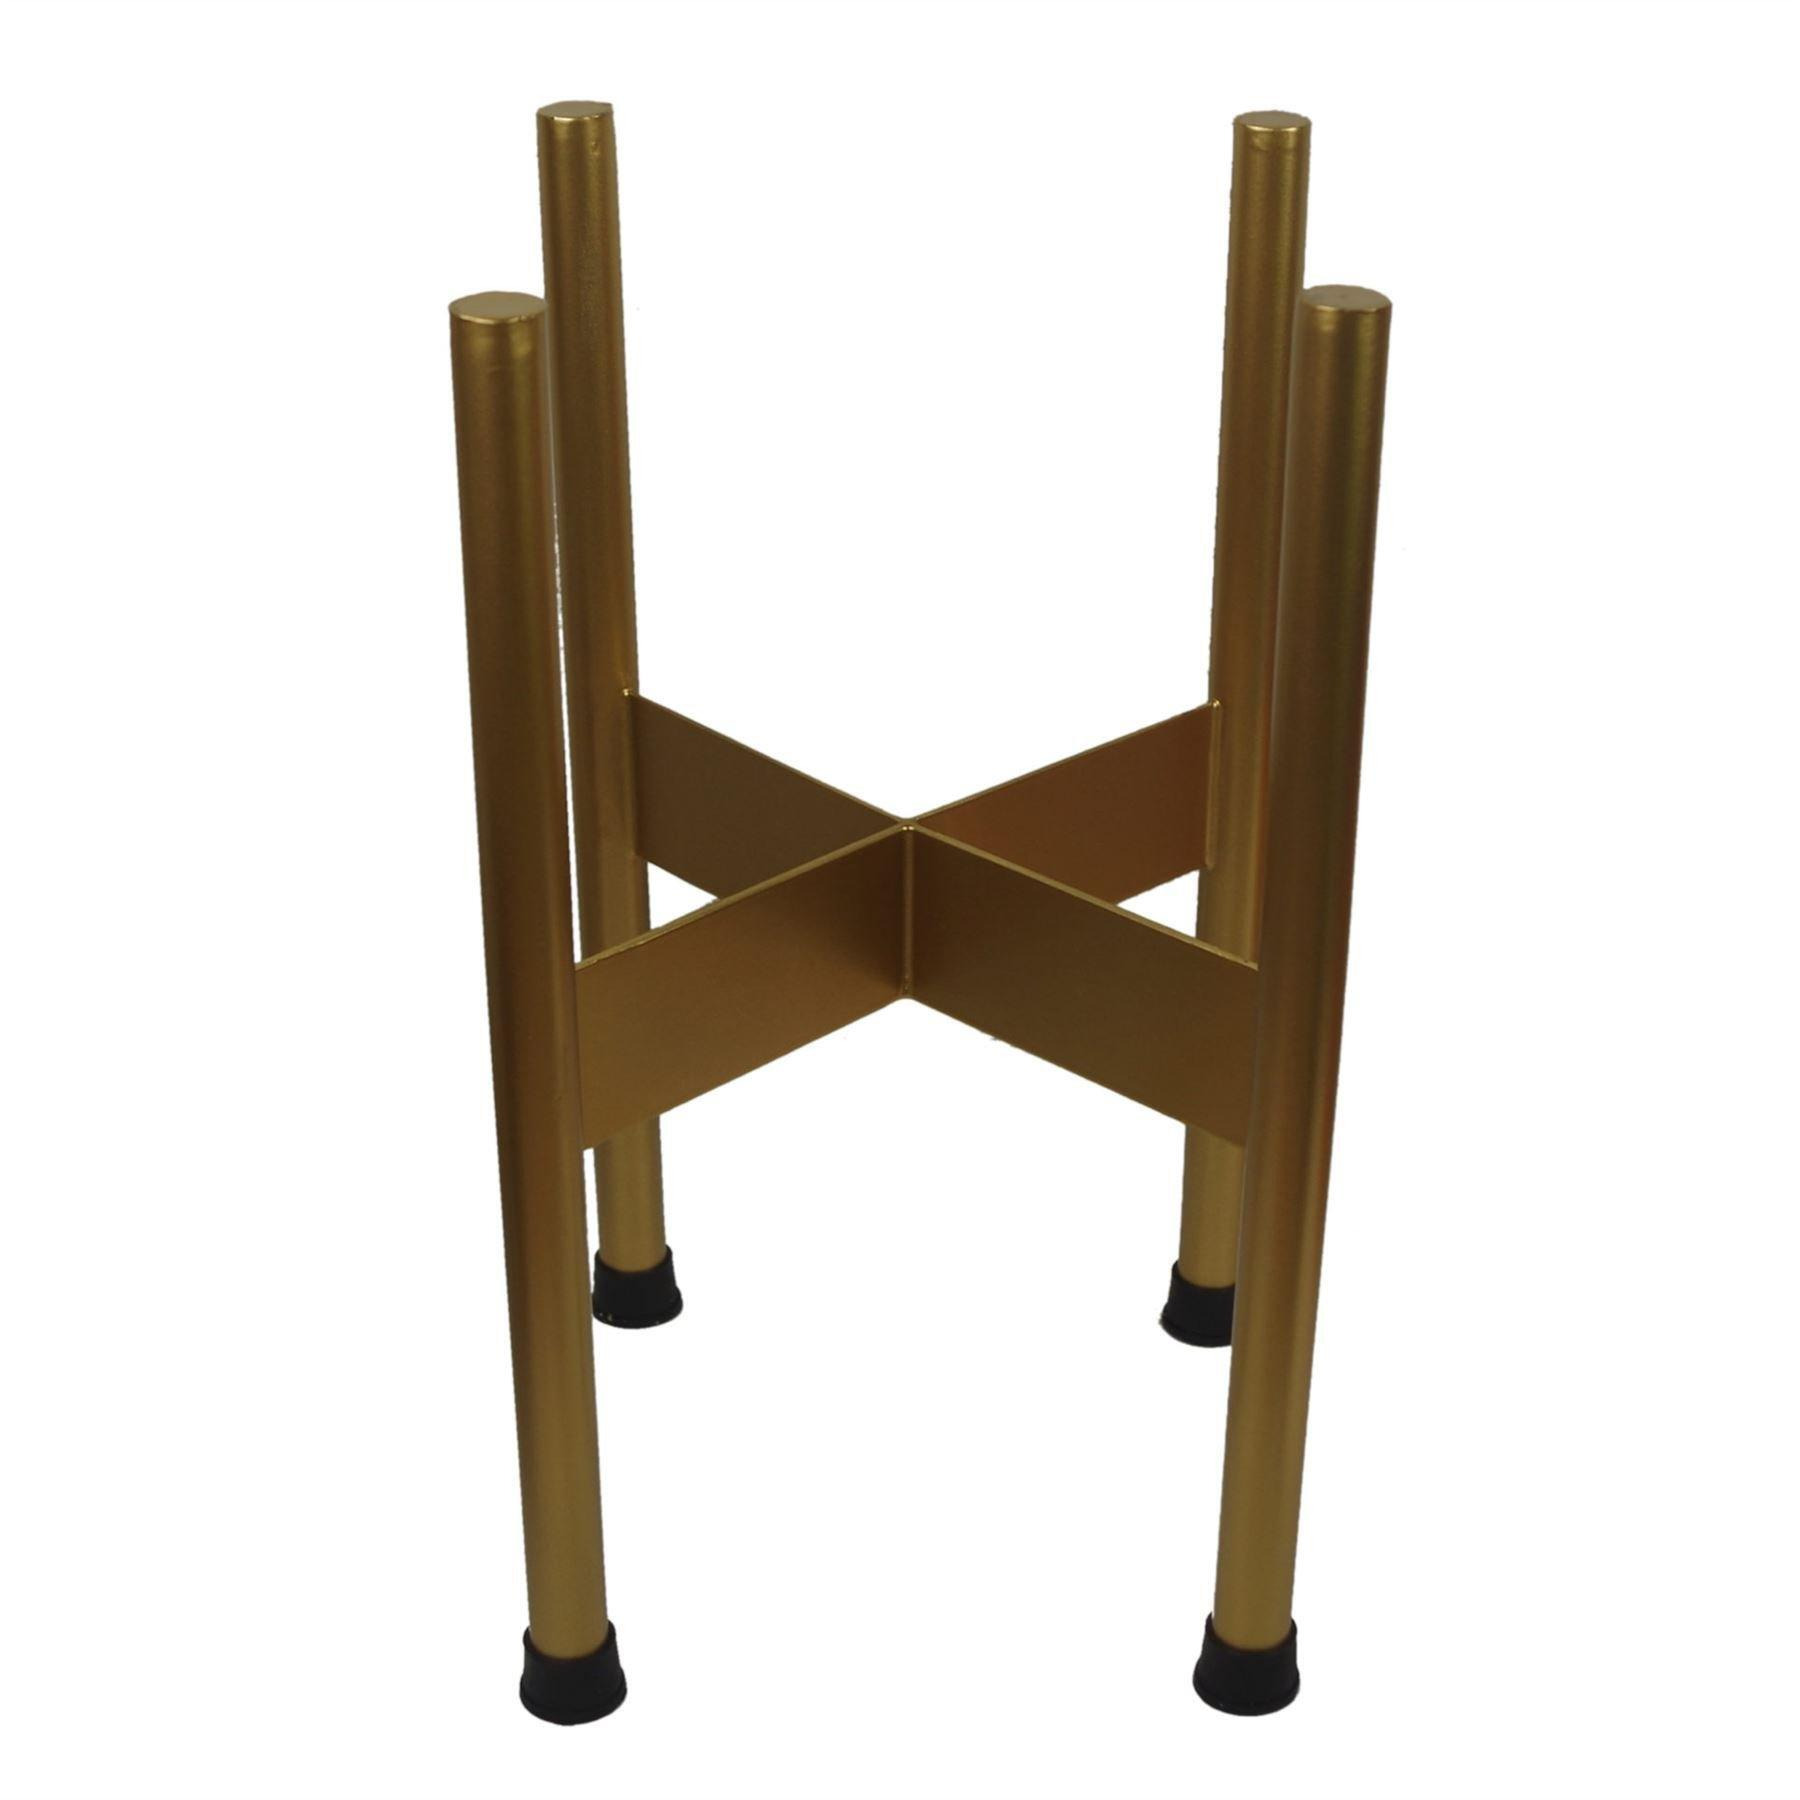 Medium Gold Planter Stand (Planter not included) 38.5cm x 18cm - image 1